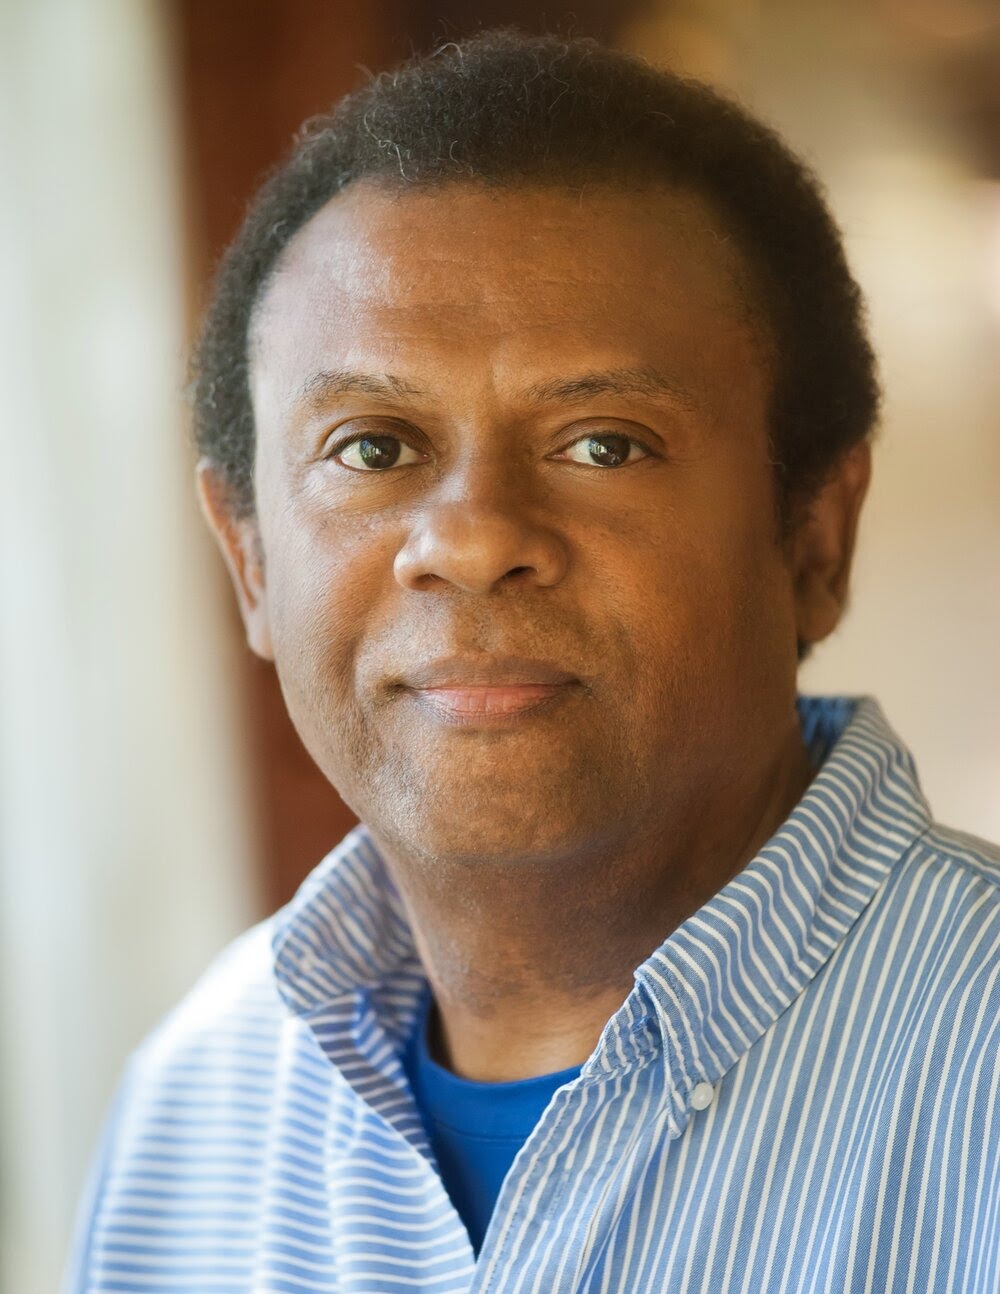 Headshot of Dr. Nicky Sheats, Black male wearing a blue shirt and blue and white striped collared shirt. Blurred tan and brown background.